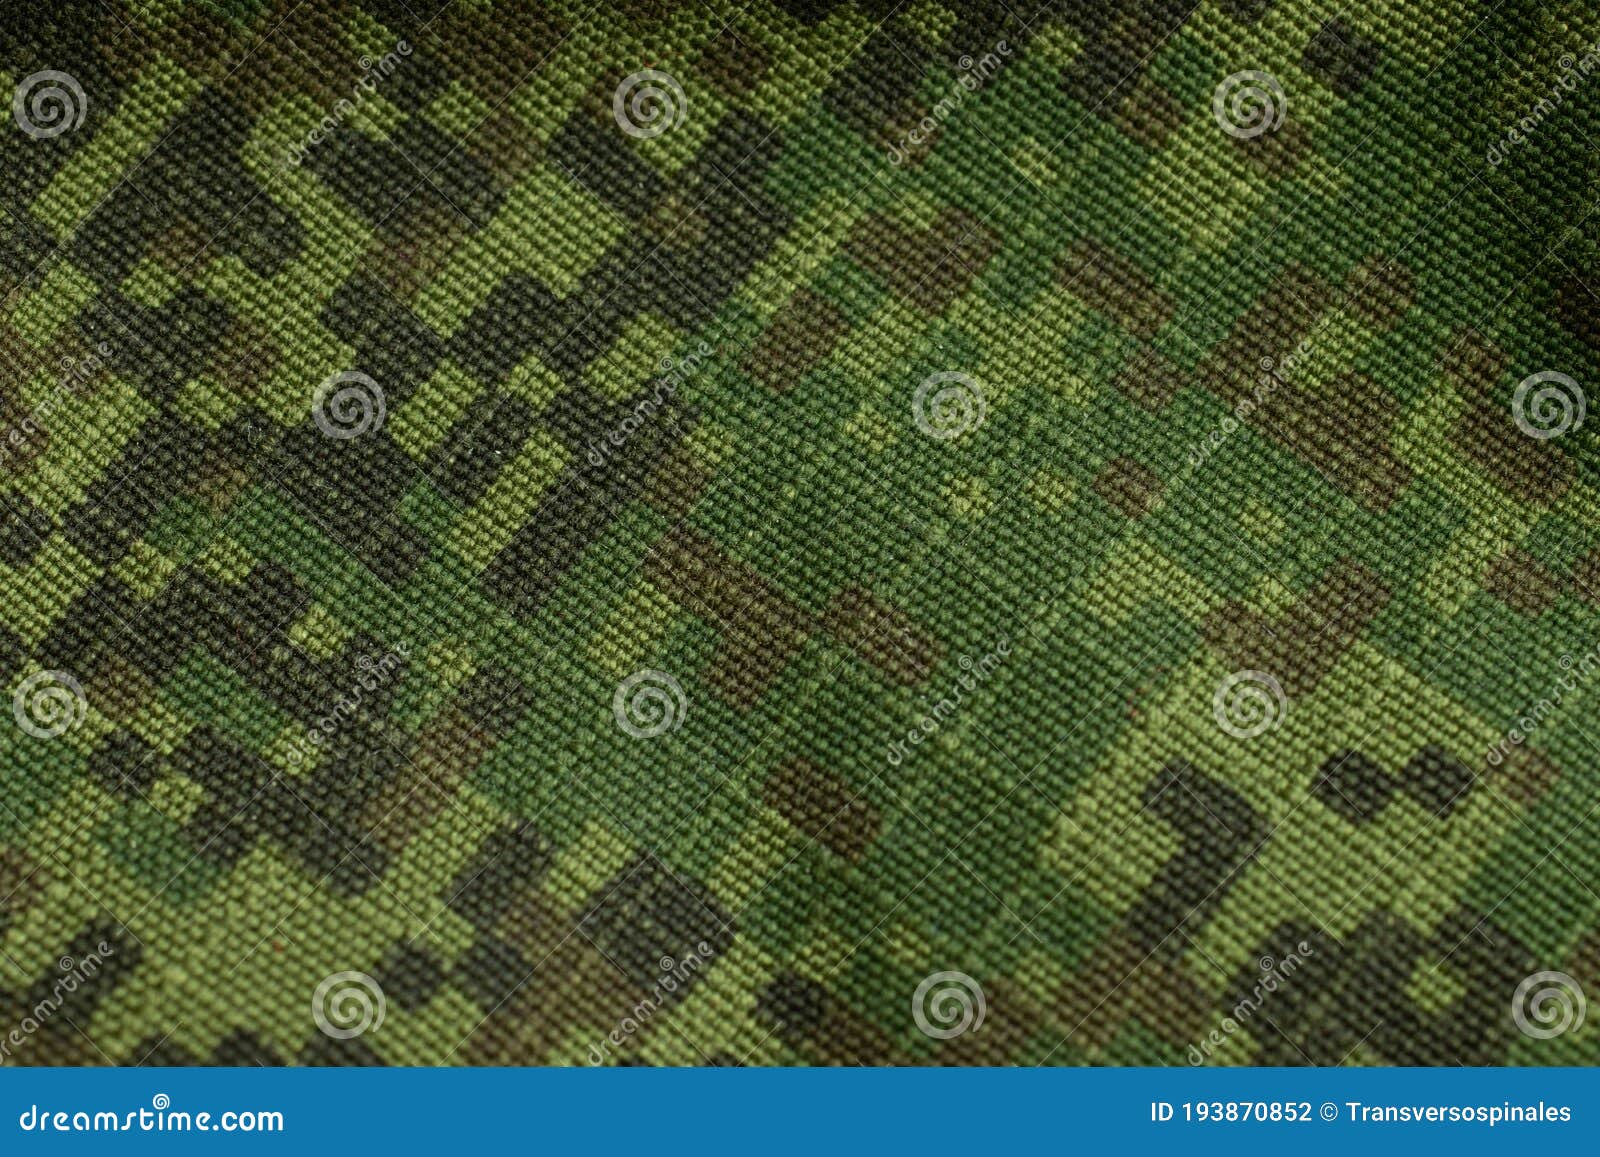 Army Green Camouflage  IPhone Wallpapers  iPhone Wallpapers